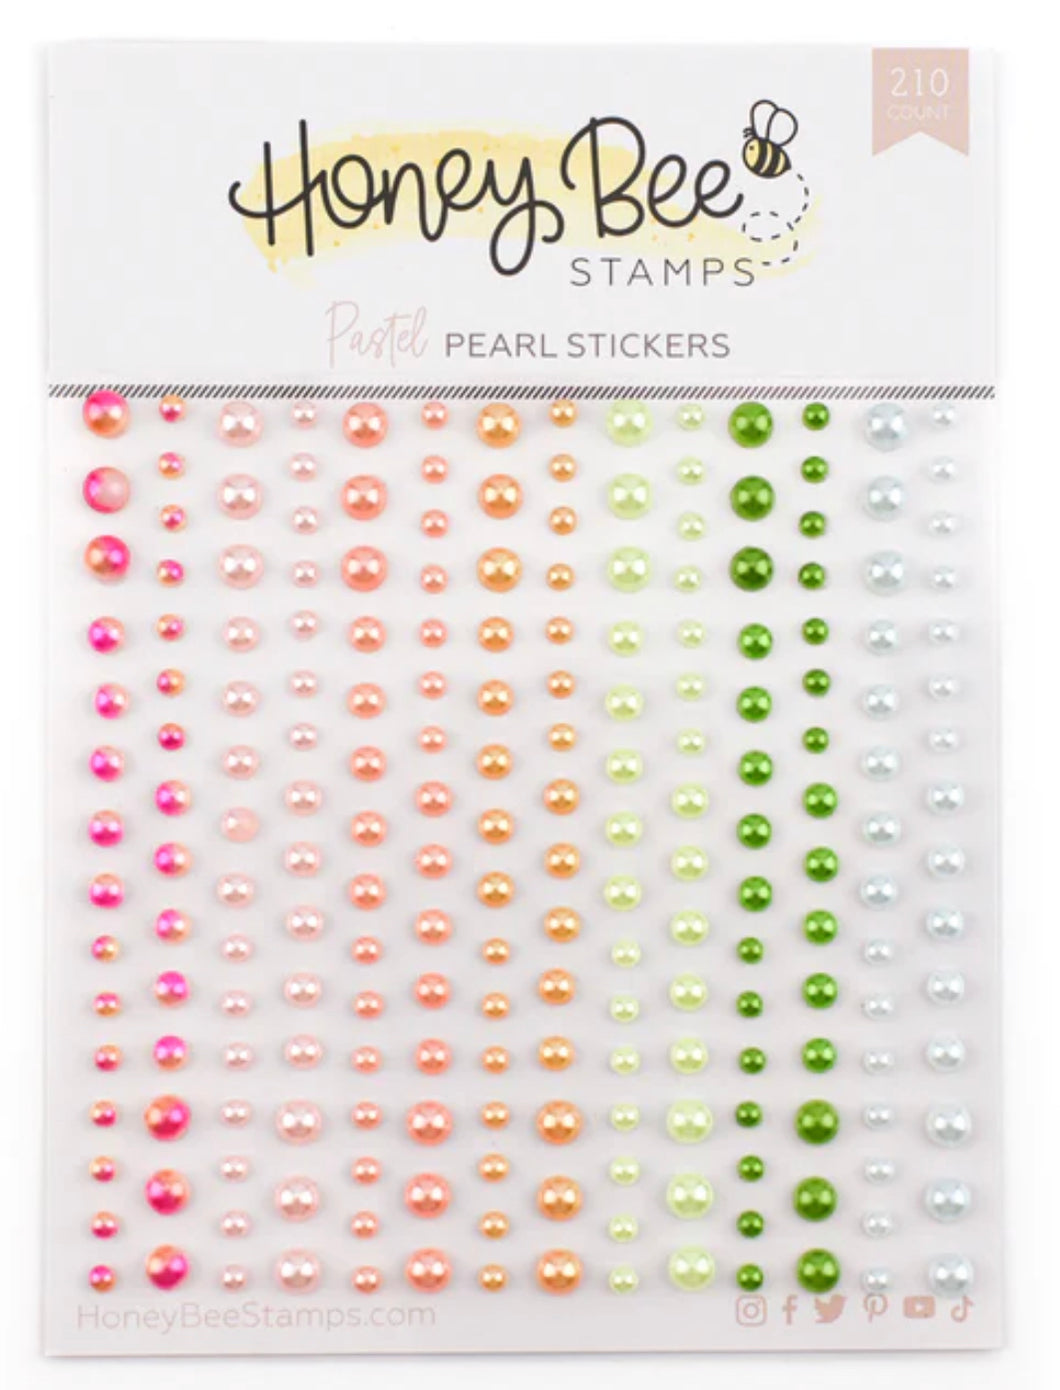 Embellishments: Honey Bee Stamps-Pastel Pearl Stickers